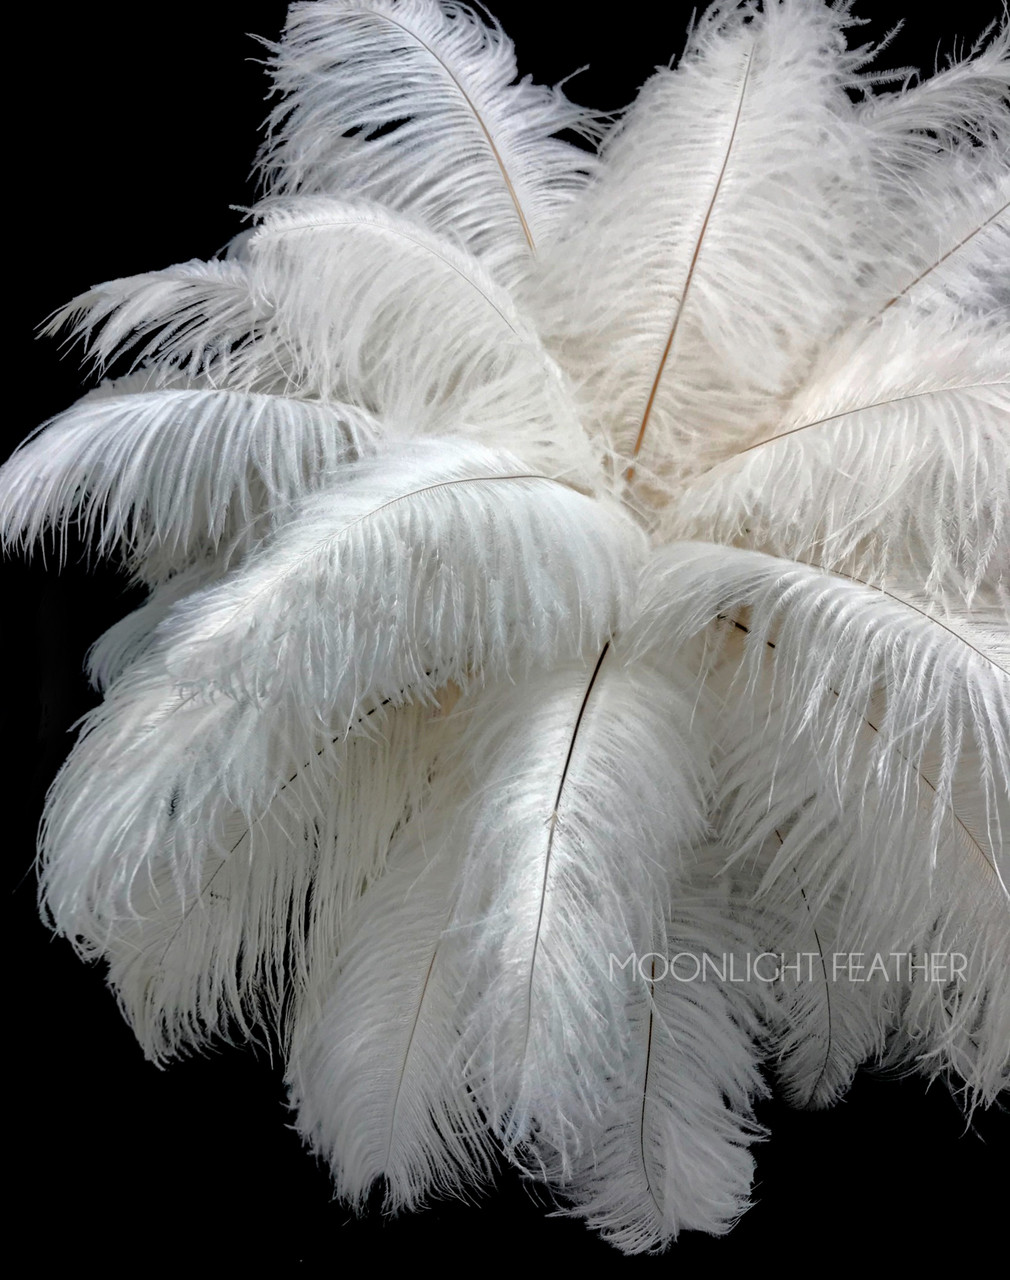 10pcs/lot White Ostrich Feather Supplies 70-75cm/28-32inch Celebration  Accessories Diy Feathers For Craft Christmas - Feather - AliExpress